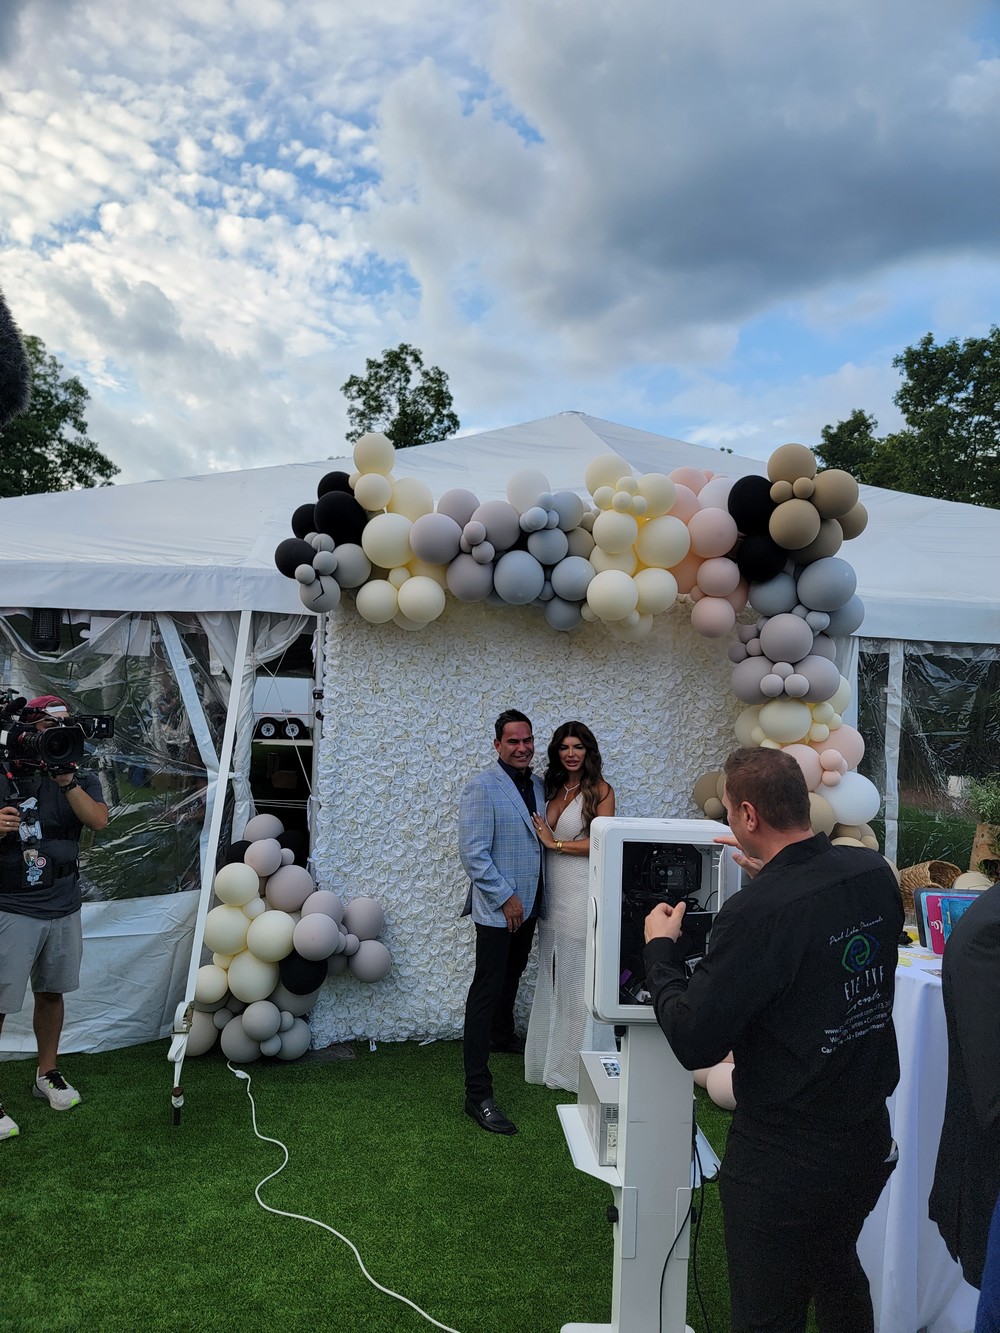 Spectacular Rehearsal Dinner Photo Booth in West Orange, NJ - For CELEBRITY Star TERESA GIUDICE from The REAL HOUSEWIVES of NEW JERSEY